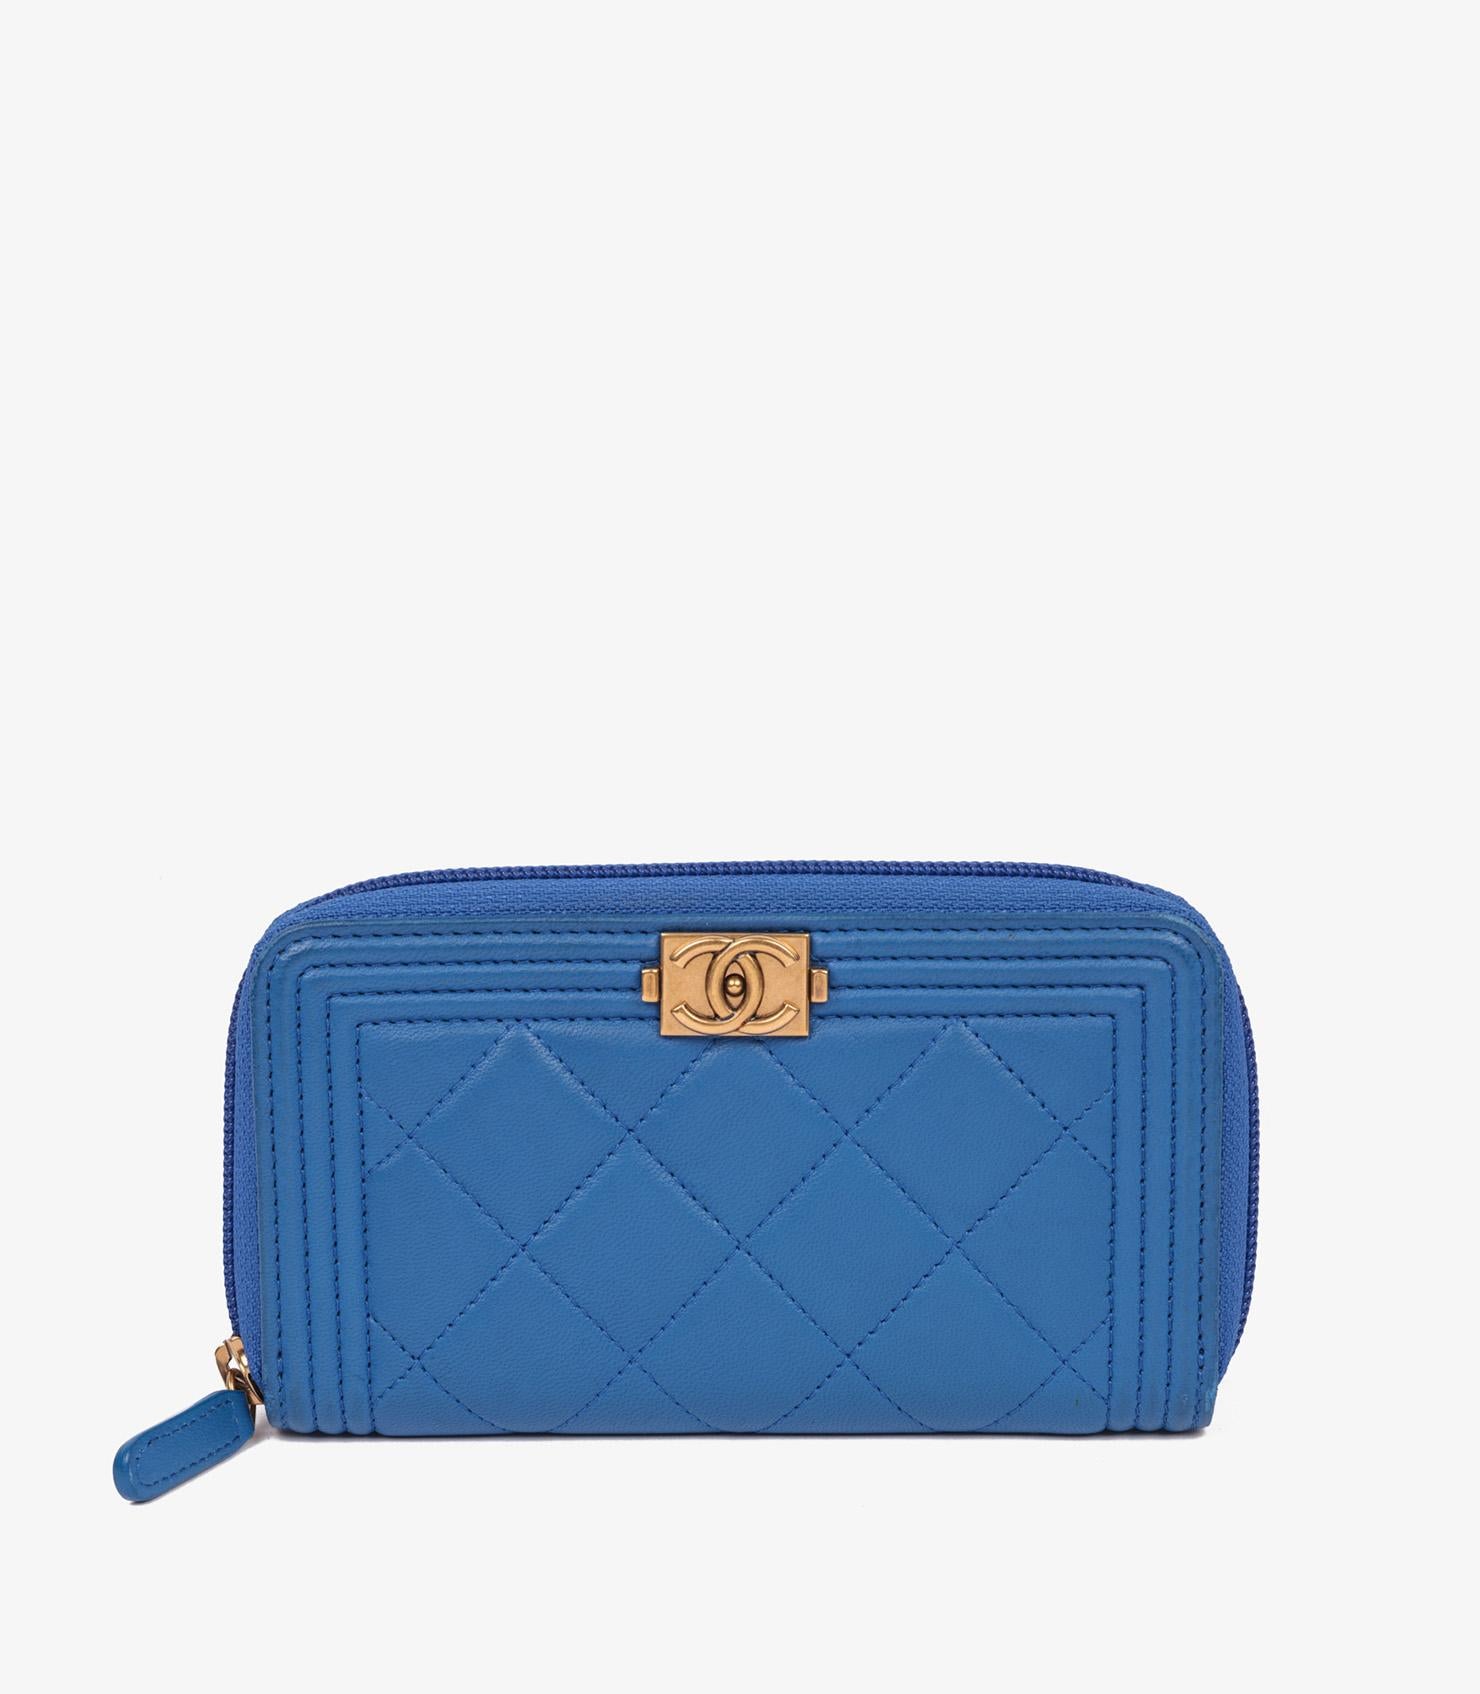 Chanel Blue Quilted Lambskin Le Boy Wallet

Brand- Chanel
Model- Le Boy Wallet
Product Type- Wallet
Serial Number- 21543645
Age- Circa 2016
Accompanied By- Chanel Dust Bag
Colour- Blue
Hardware- Aged Gold
Material(s)- Lambskin Leather
Authenticity